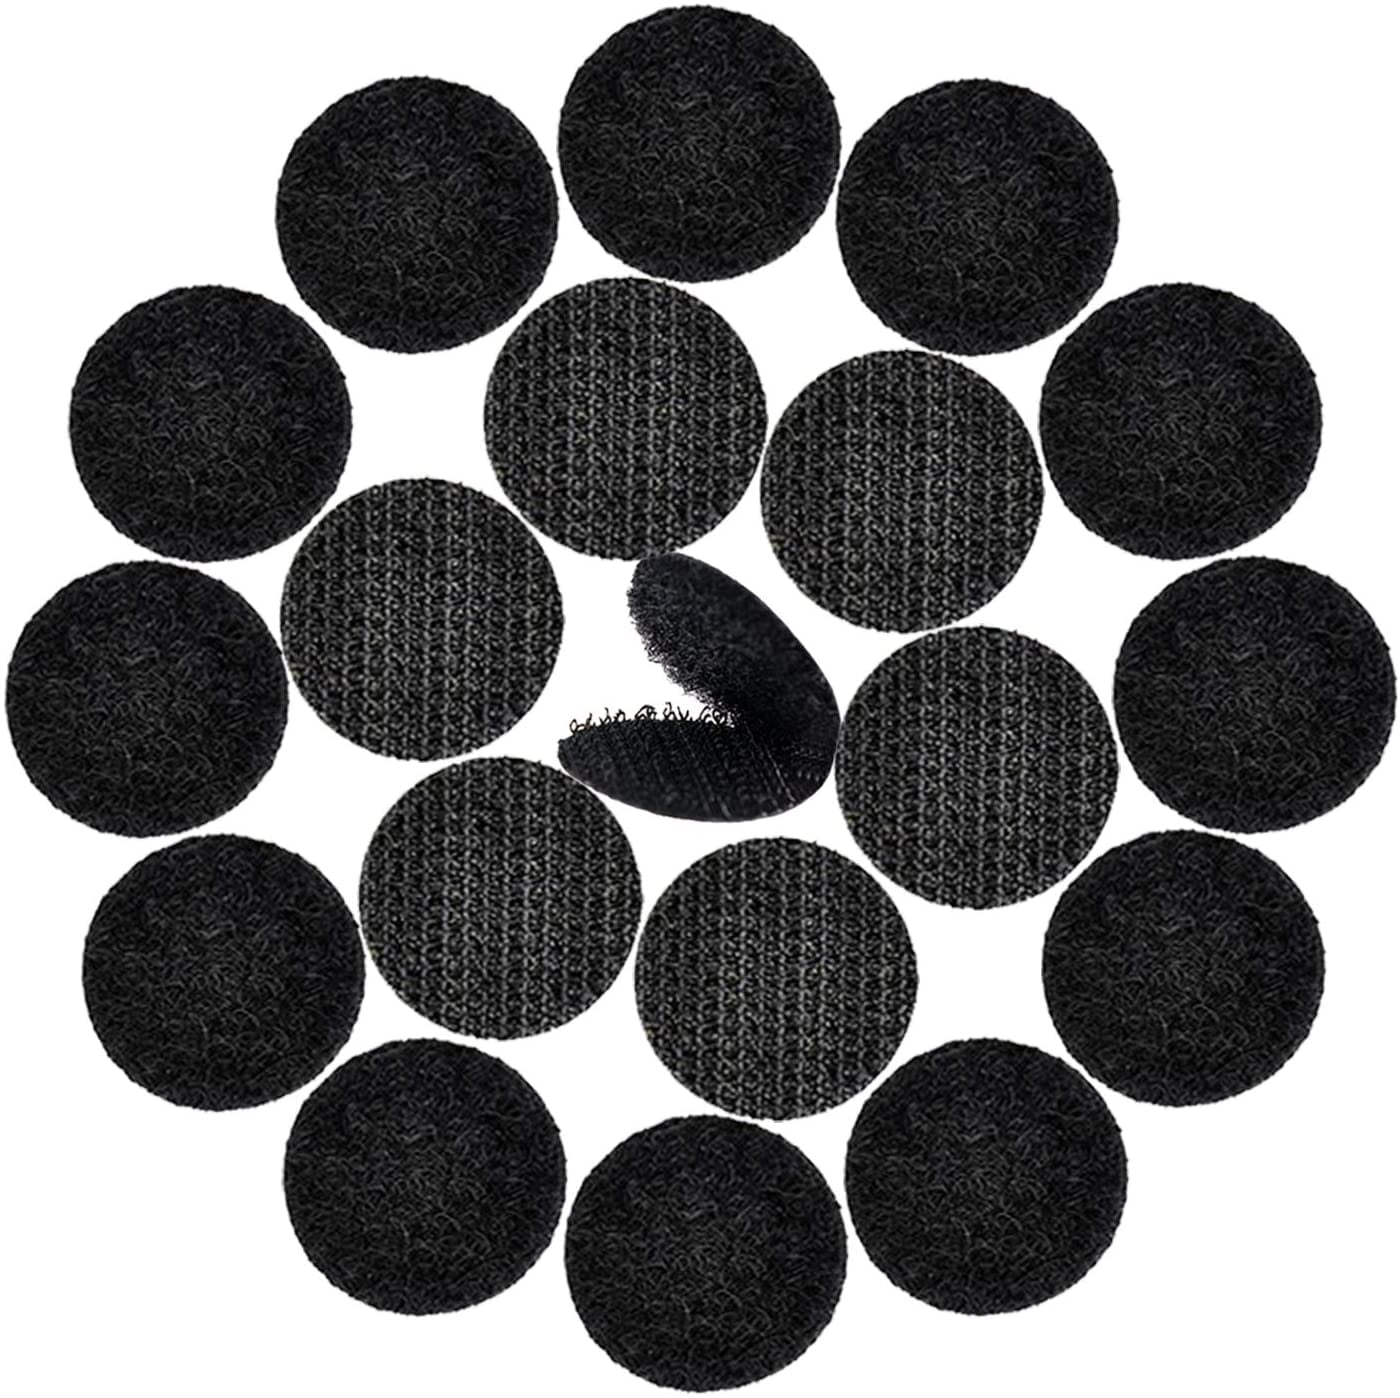 Black Home DIY Lover Office 256pcs Heavy Duty Hook and Loop Dots 1 inch in Diameter Self Adhesive Super Sticky Dots Fastening Mounting Double Sided Tape for School 